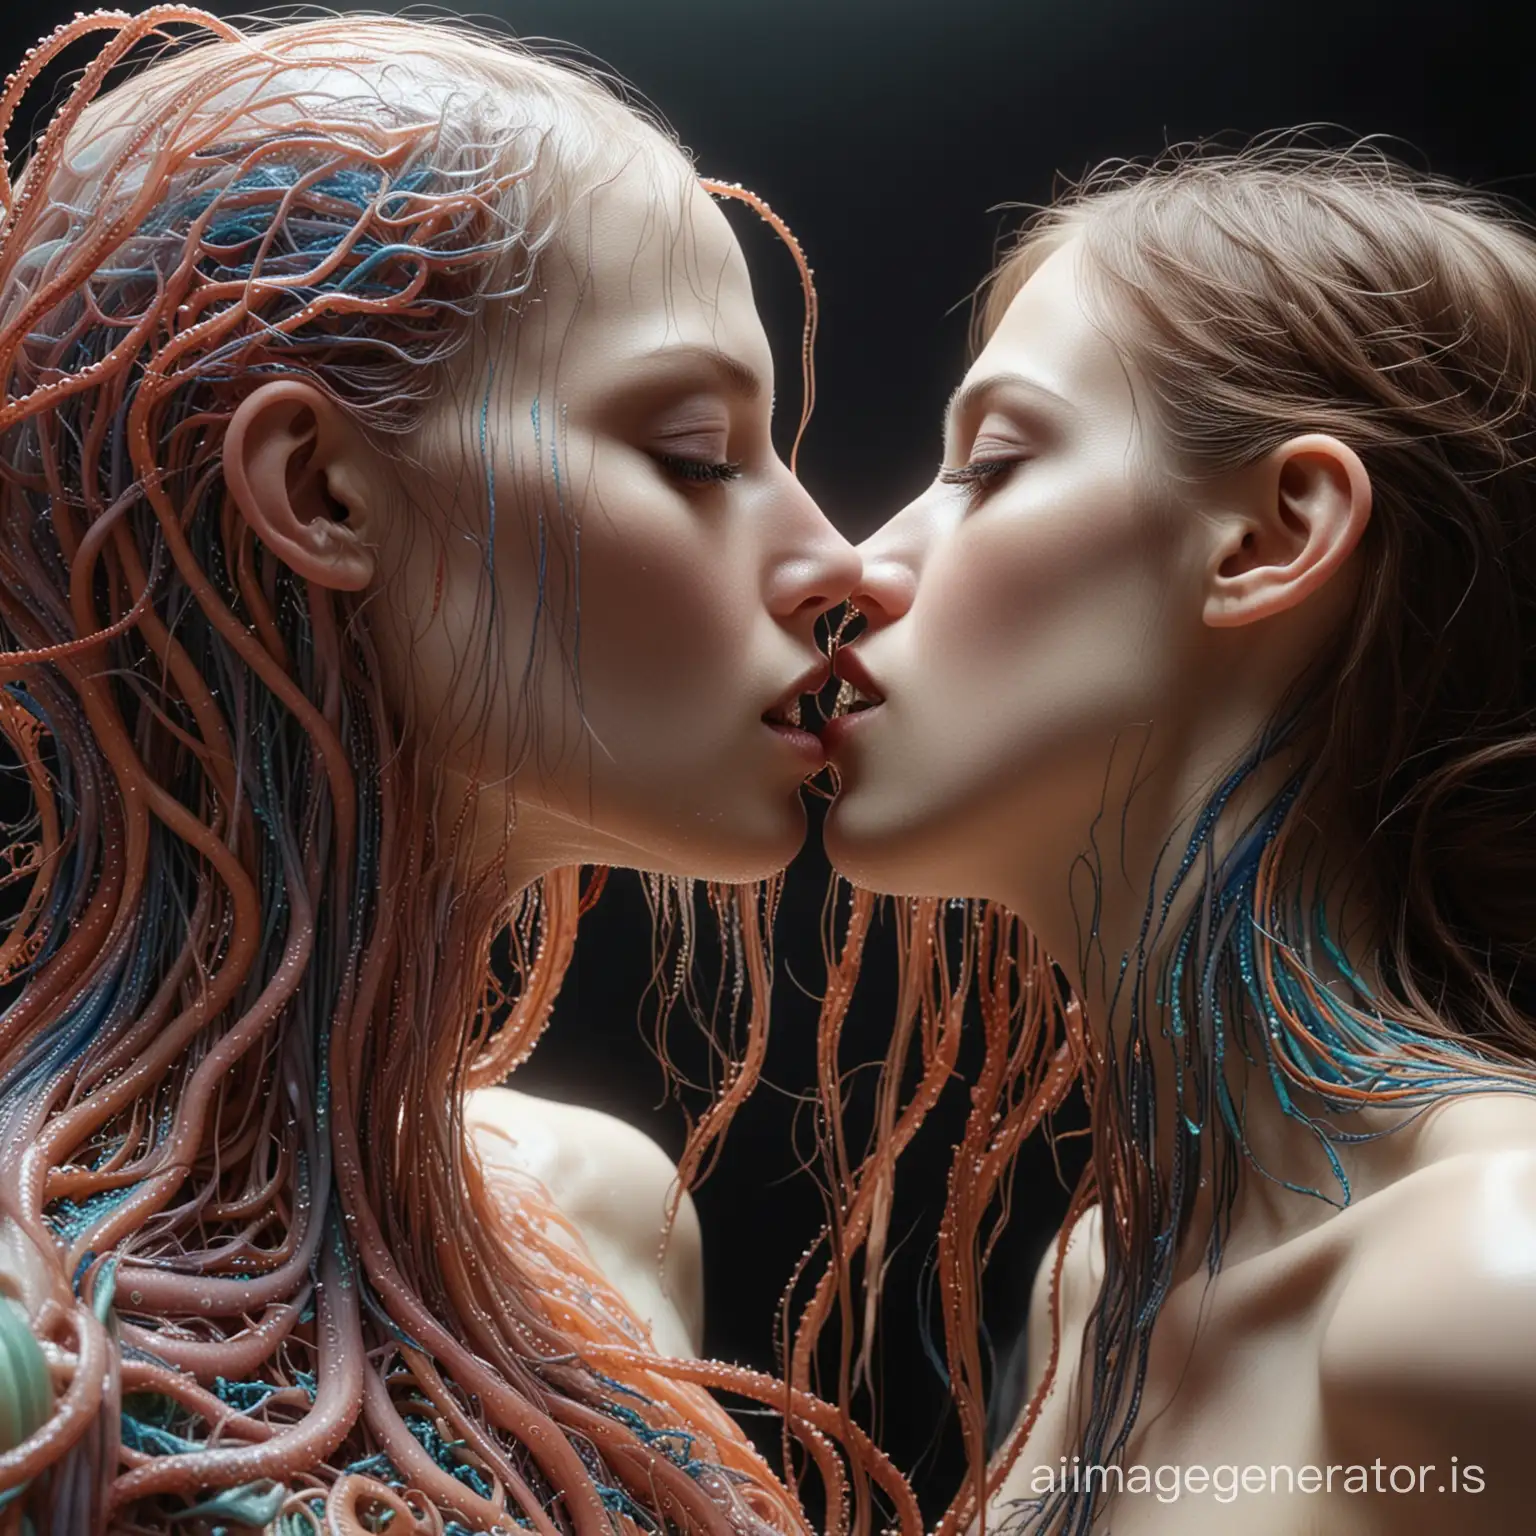 Translucent-Creature-Embraces-Woman-Tentacled-Love-in-Gothic-Horror-Scene